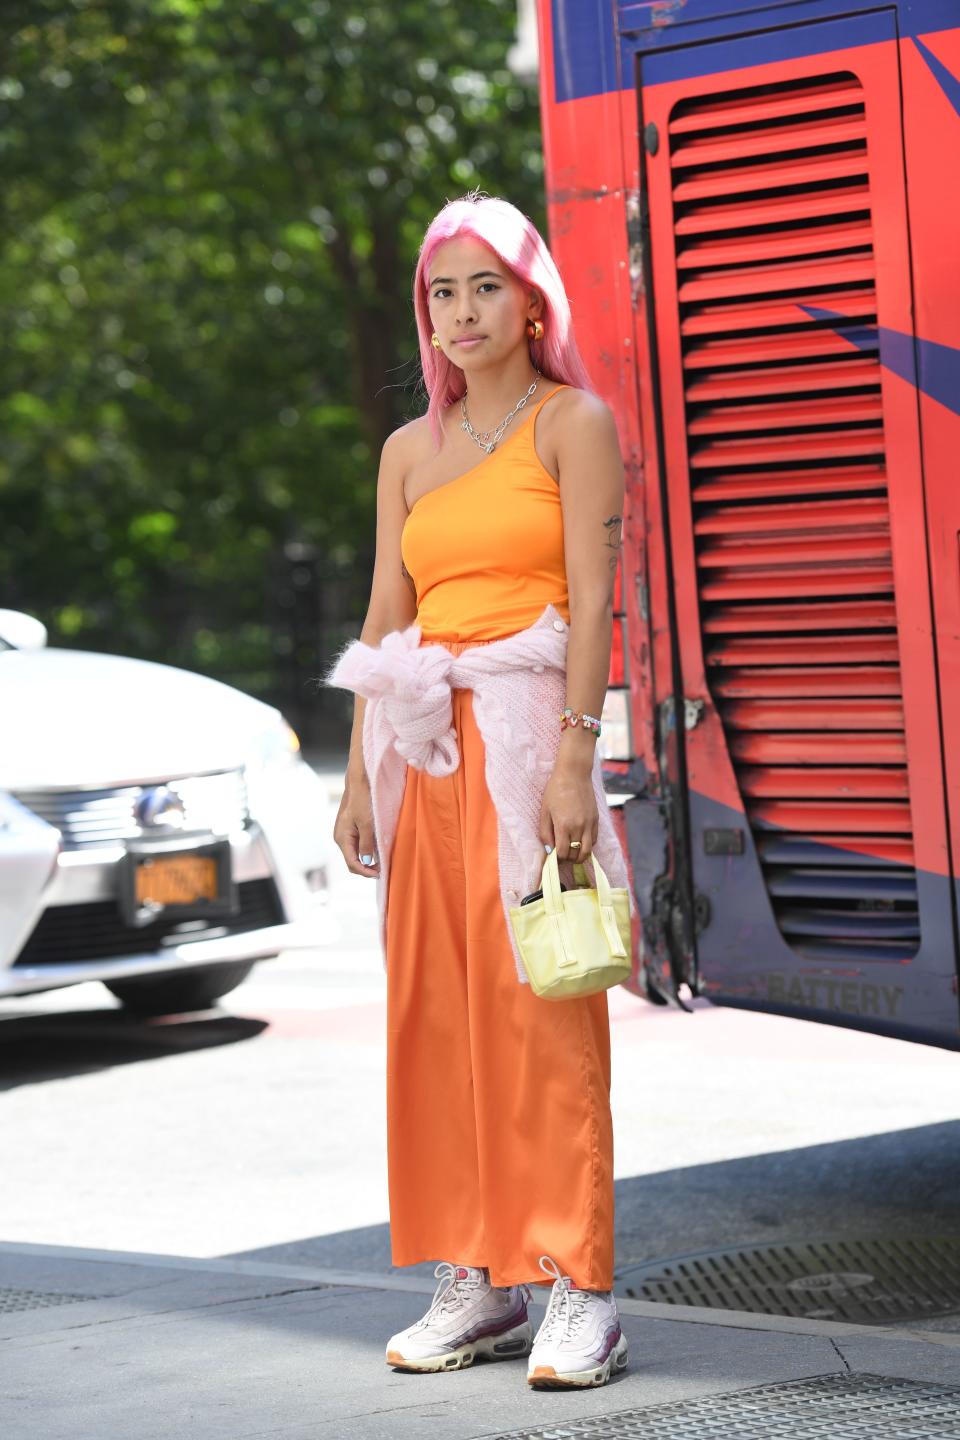 If your outfit is channeling multiple kinds of citrus fruits, you’re doing it right.